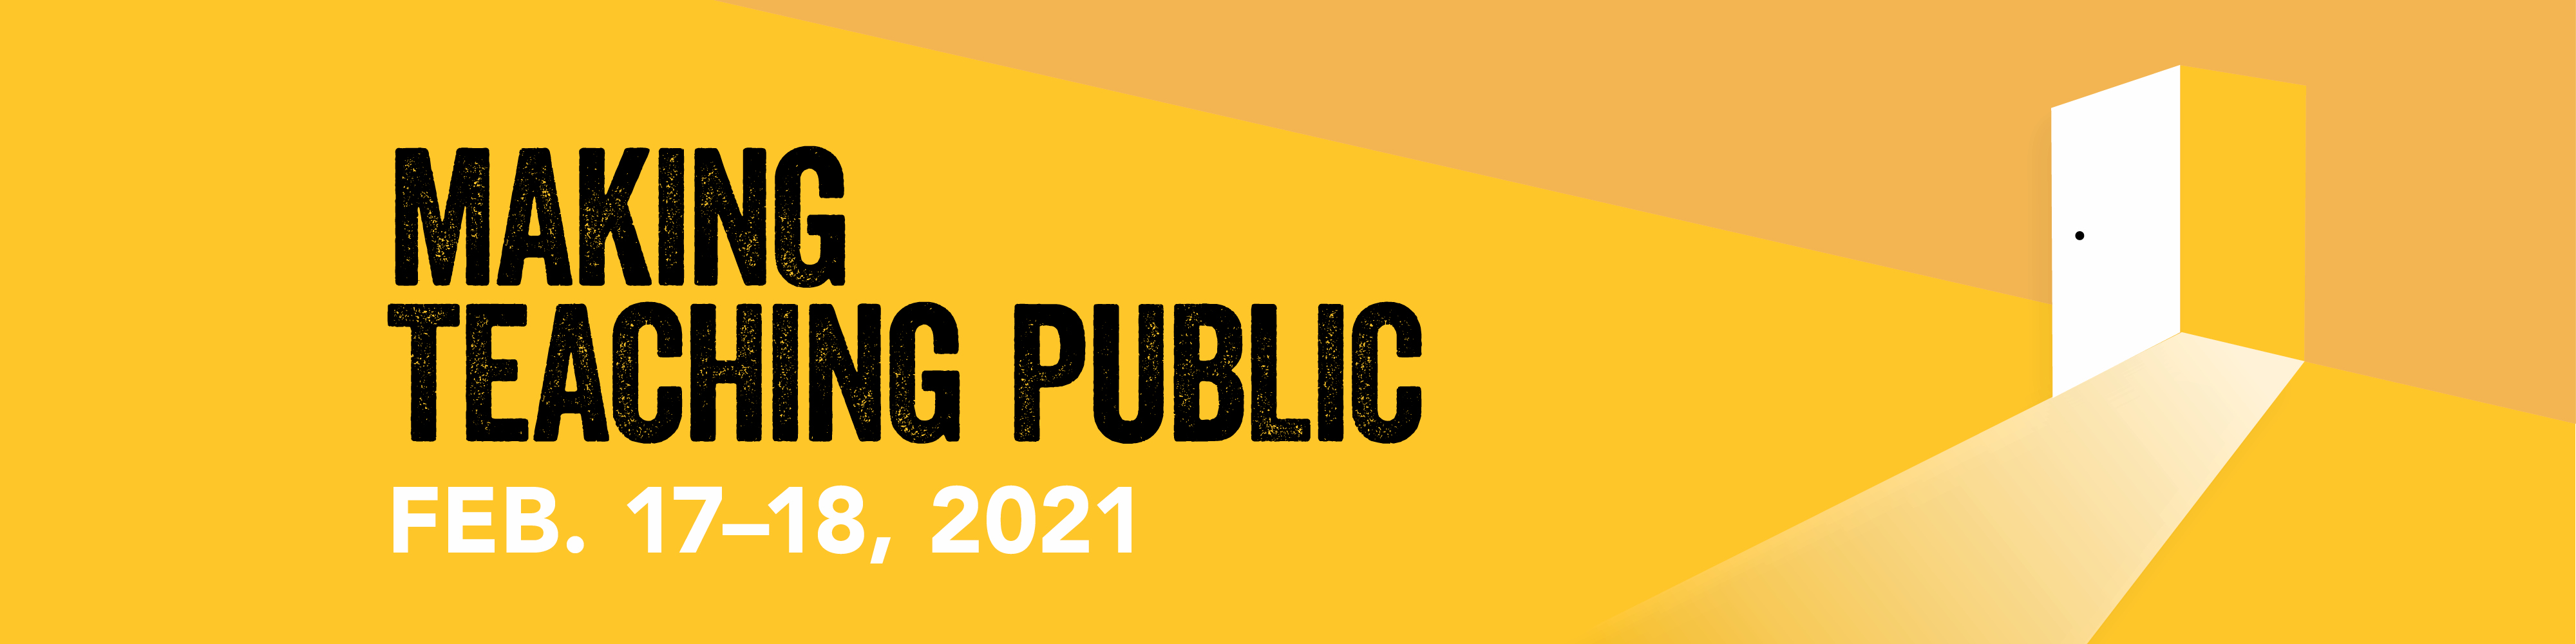 Making Teaching Public. Feb. 17-18 2021. Image: Yellow background with a door opening.